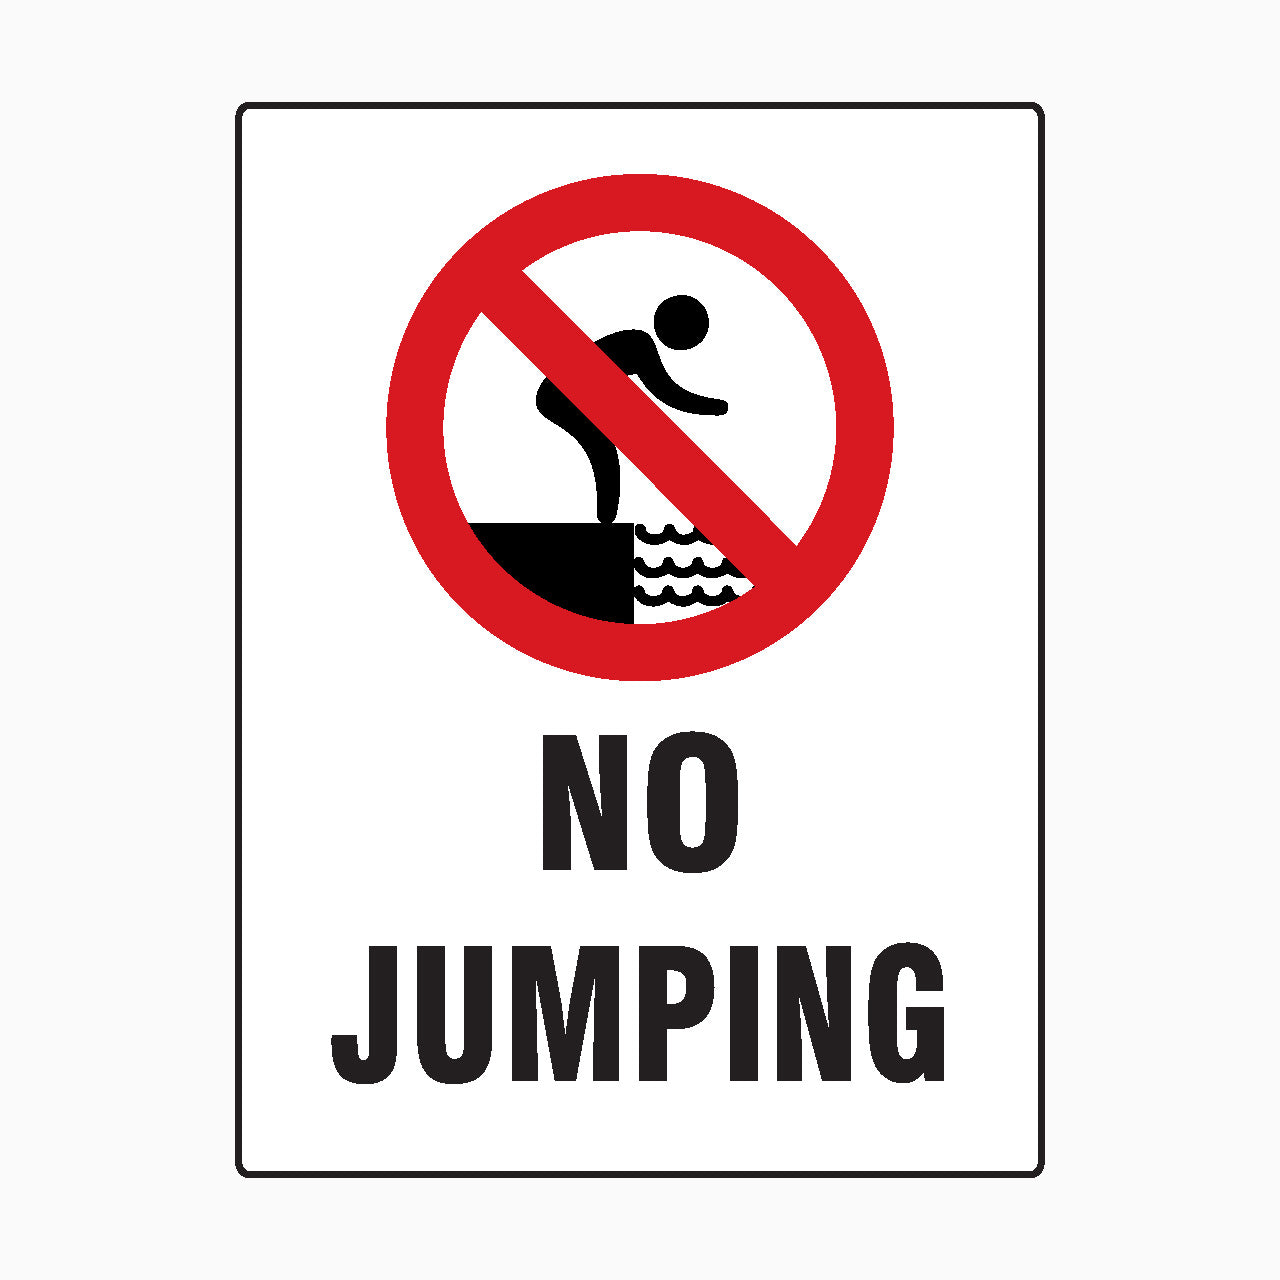 NO JUMPING SIGN - Water Safety Signs – Get signs